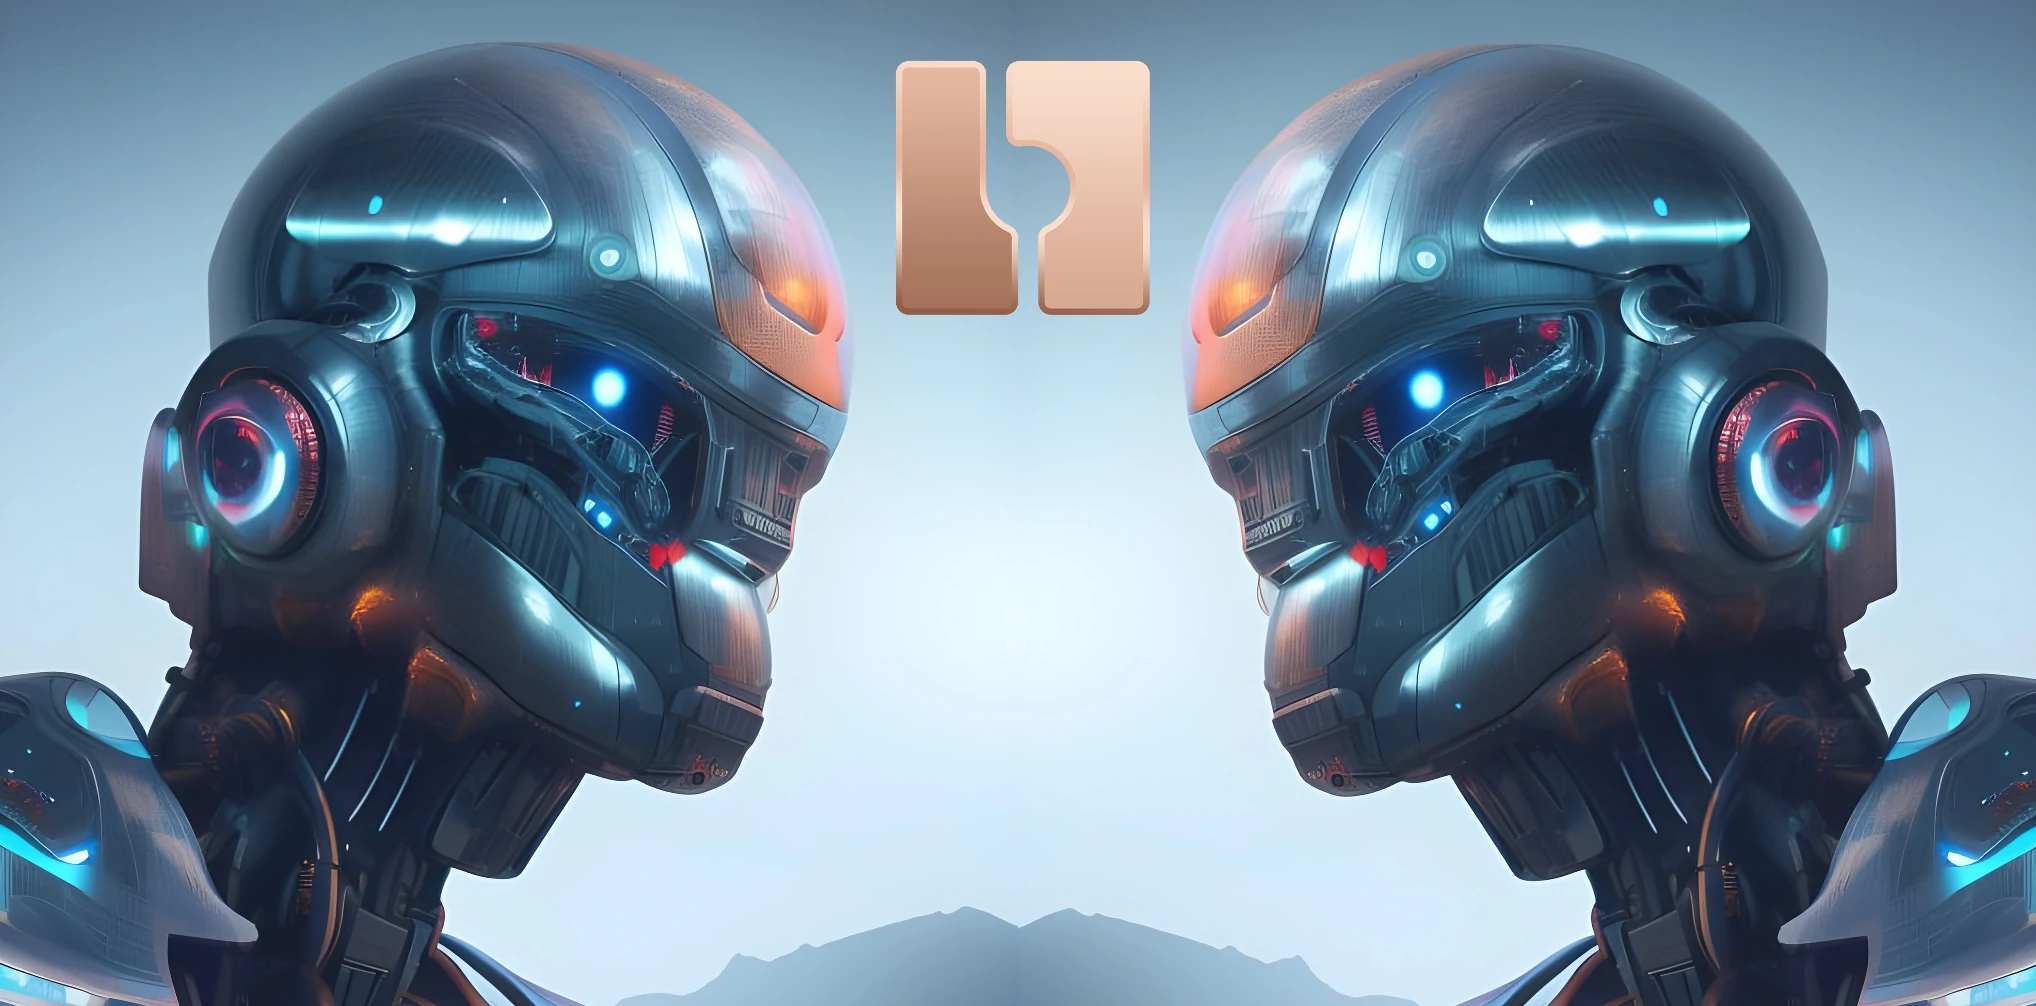 The image showing two AI bots.